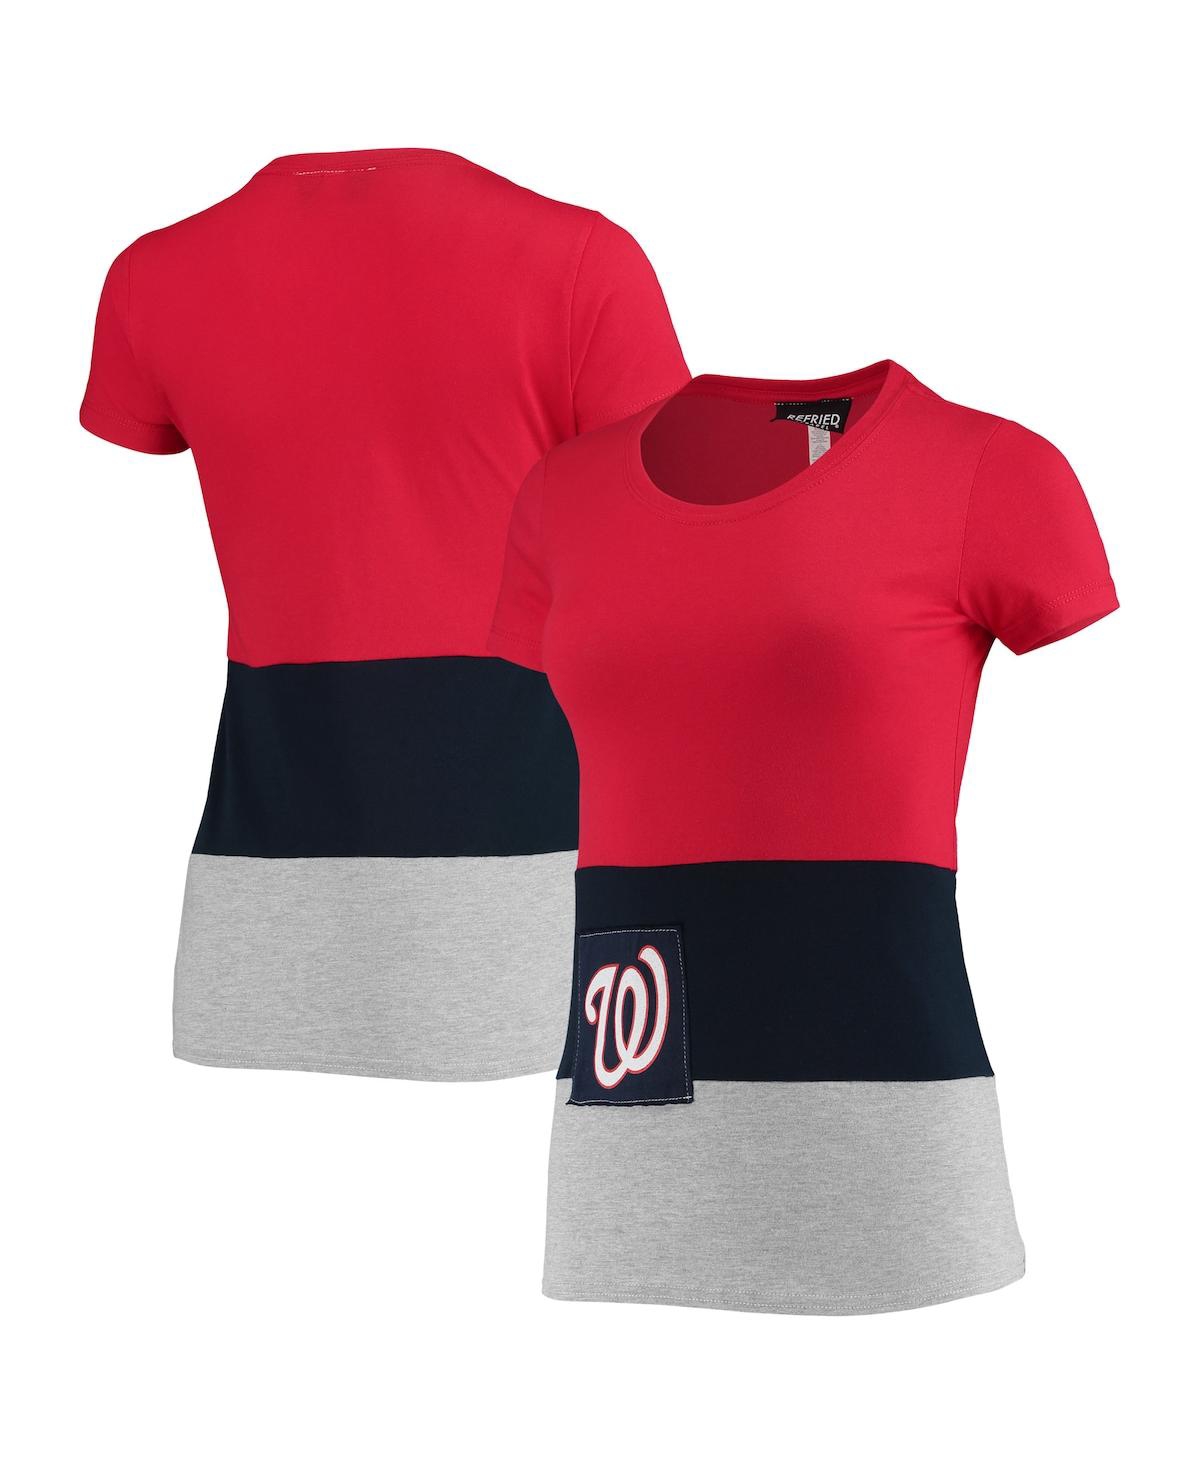 REFRIED APPAREL WOMEN'S REFRIED APPAREL RED WASHINGTON NATIONALS FITTED T-SHIRT